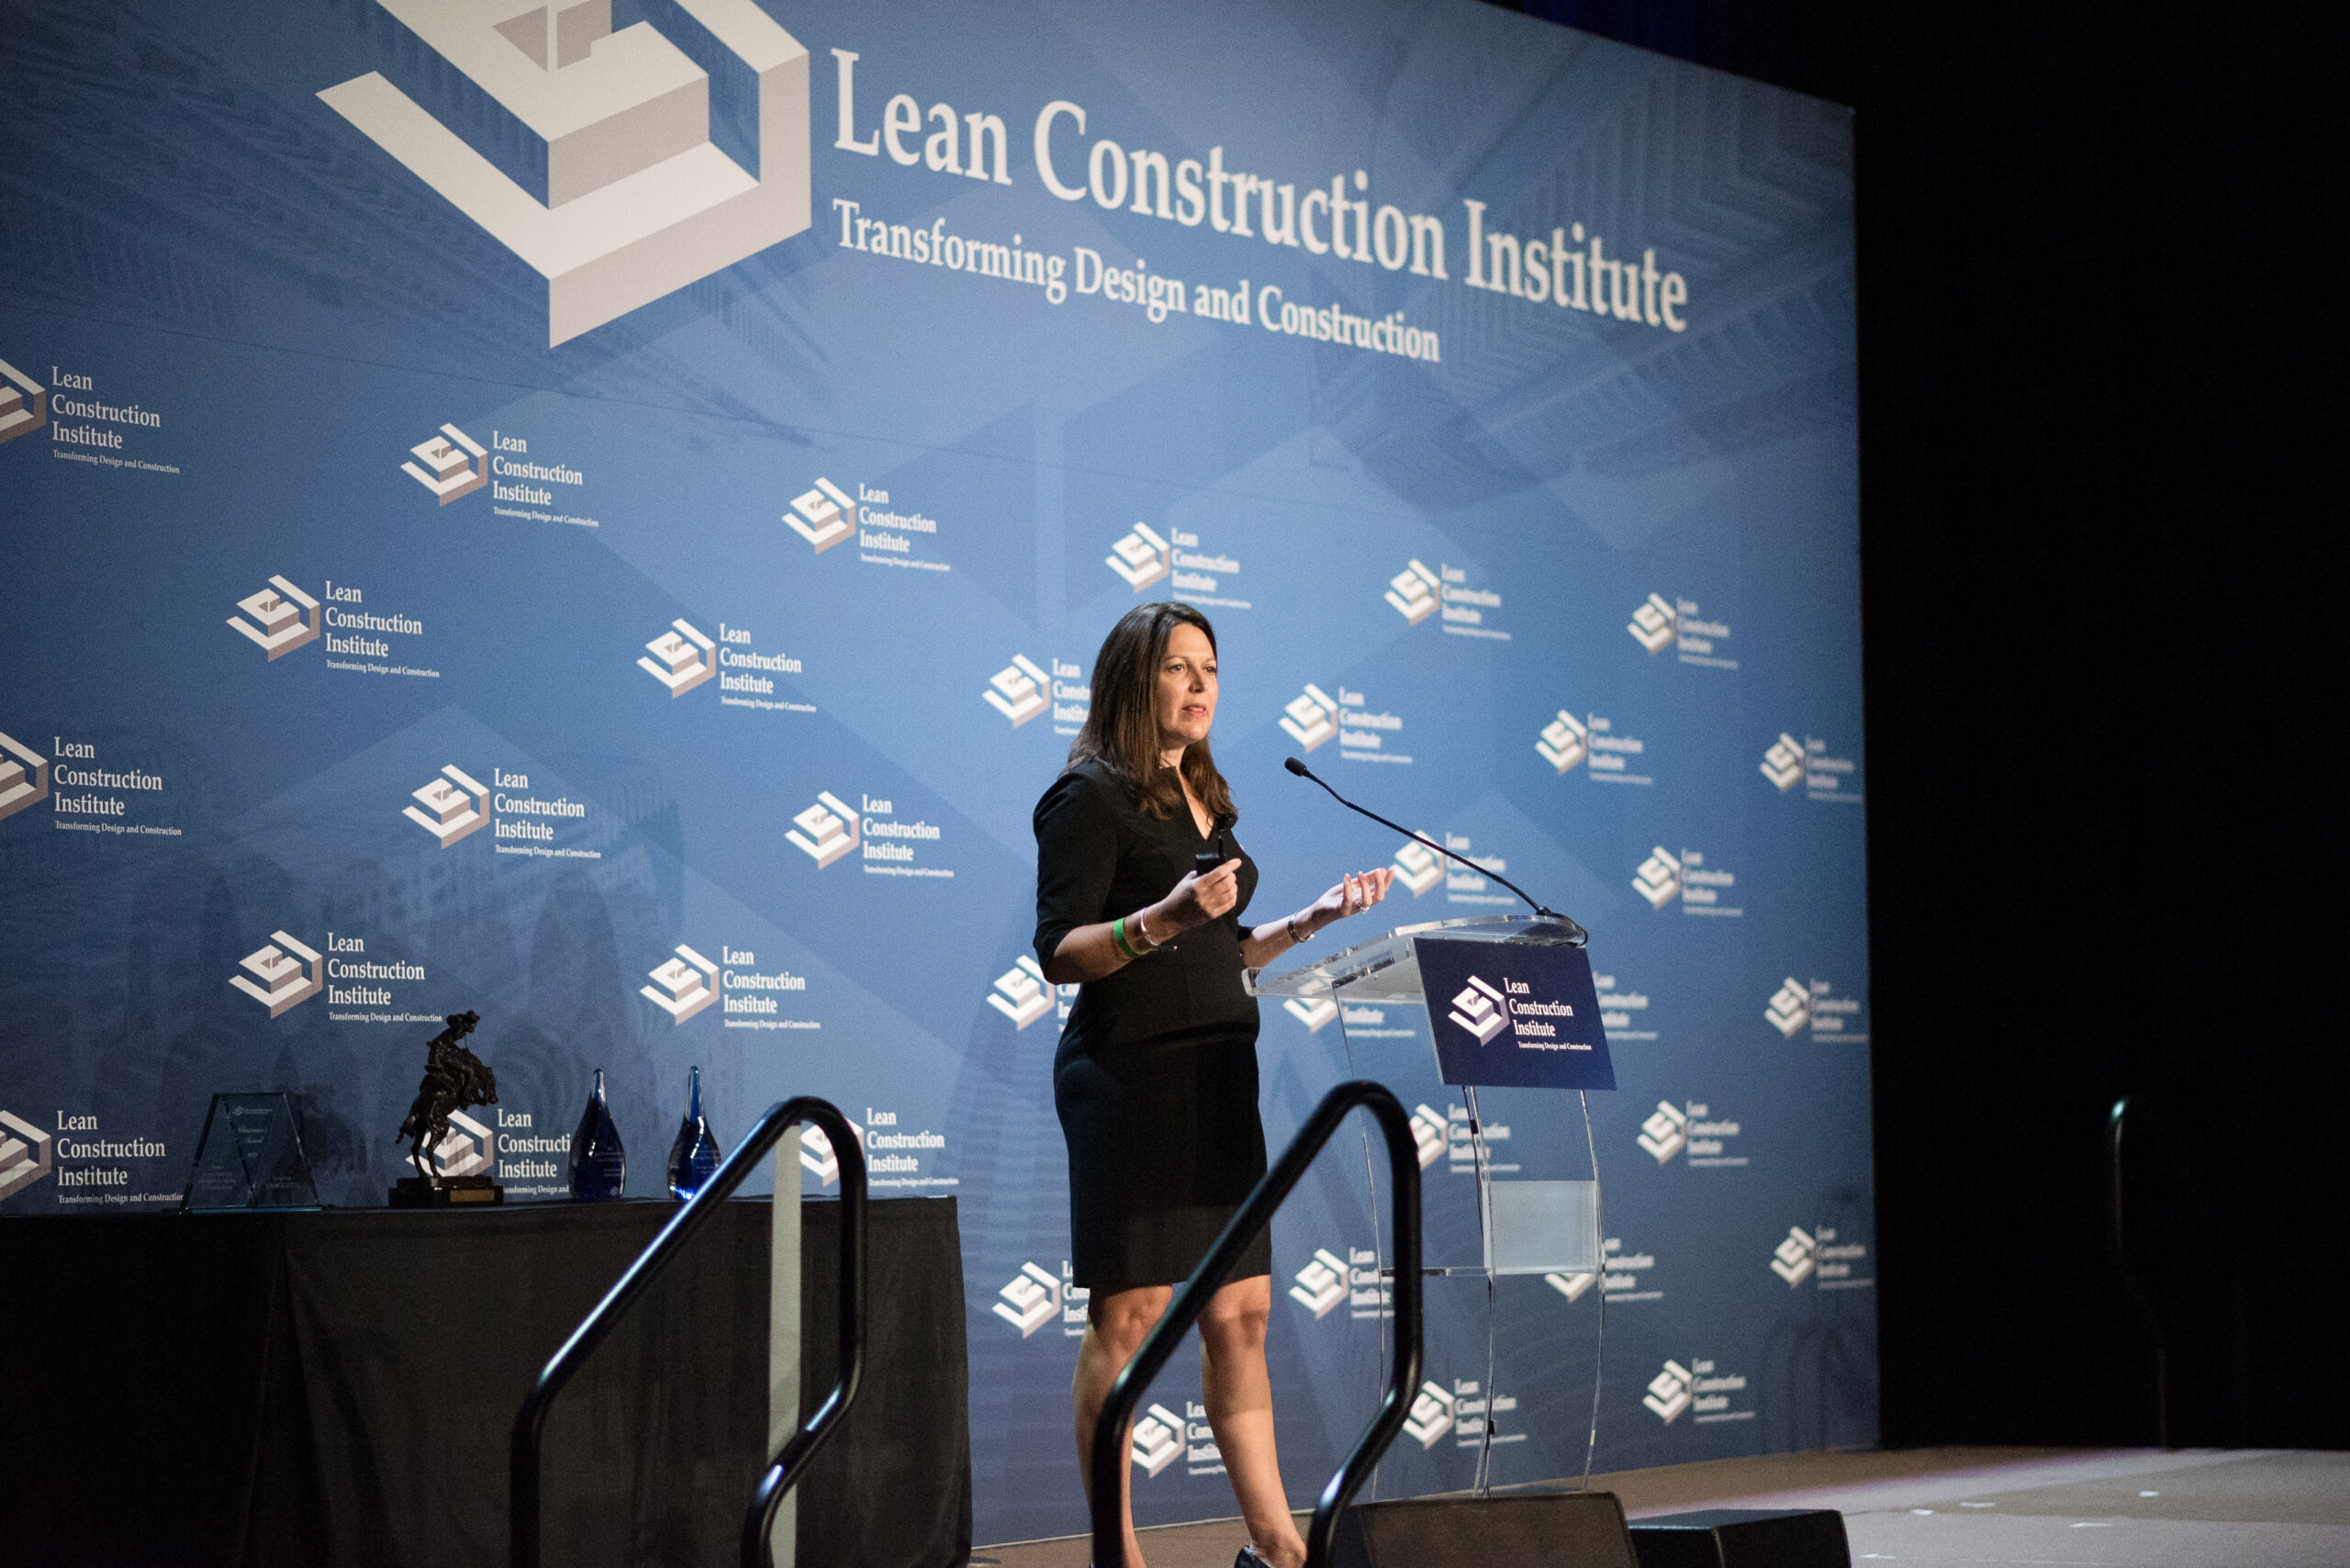 A woman provides a presentation about Lean services on a stage with the Lean Construction Institute logo in the backdrop